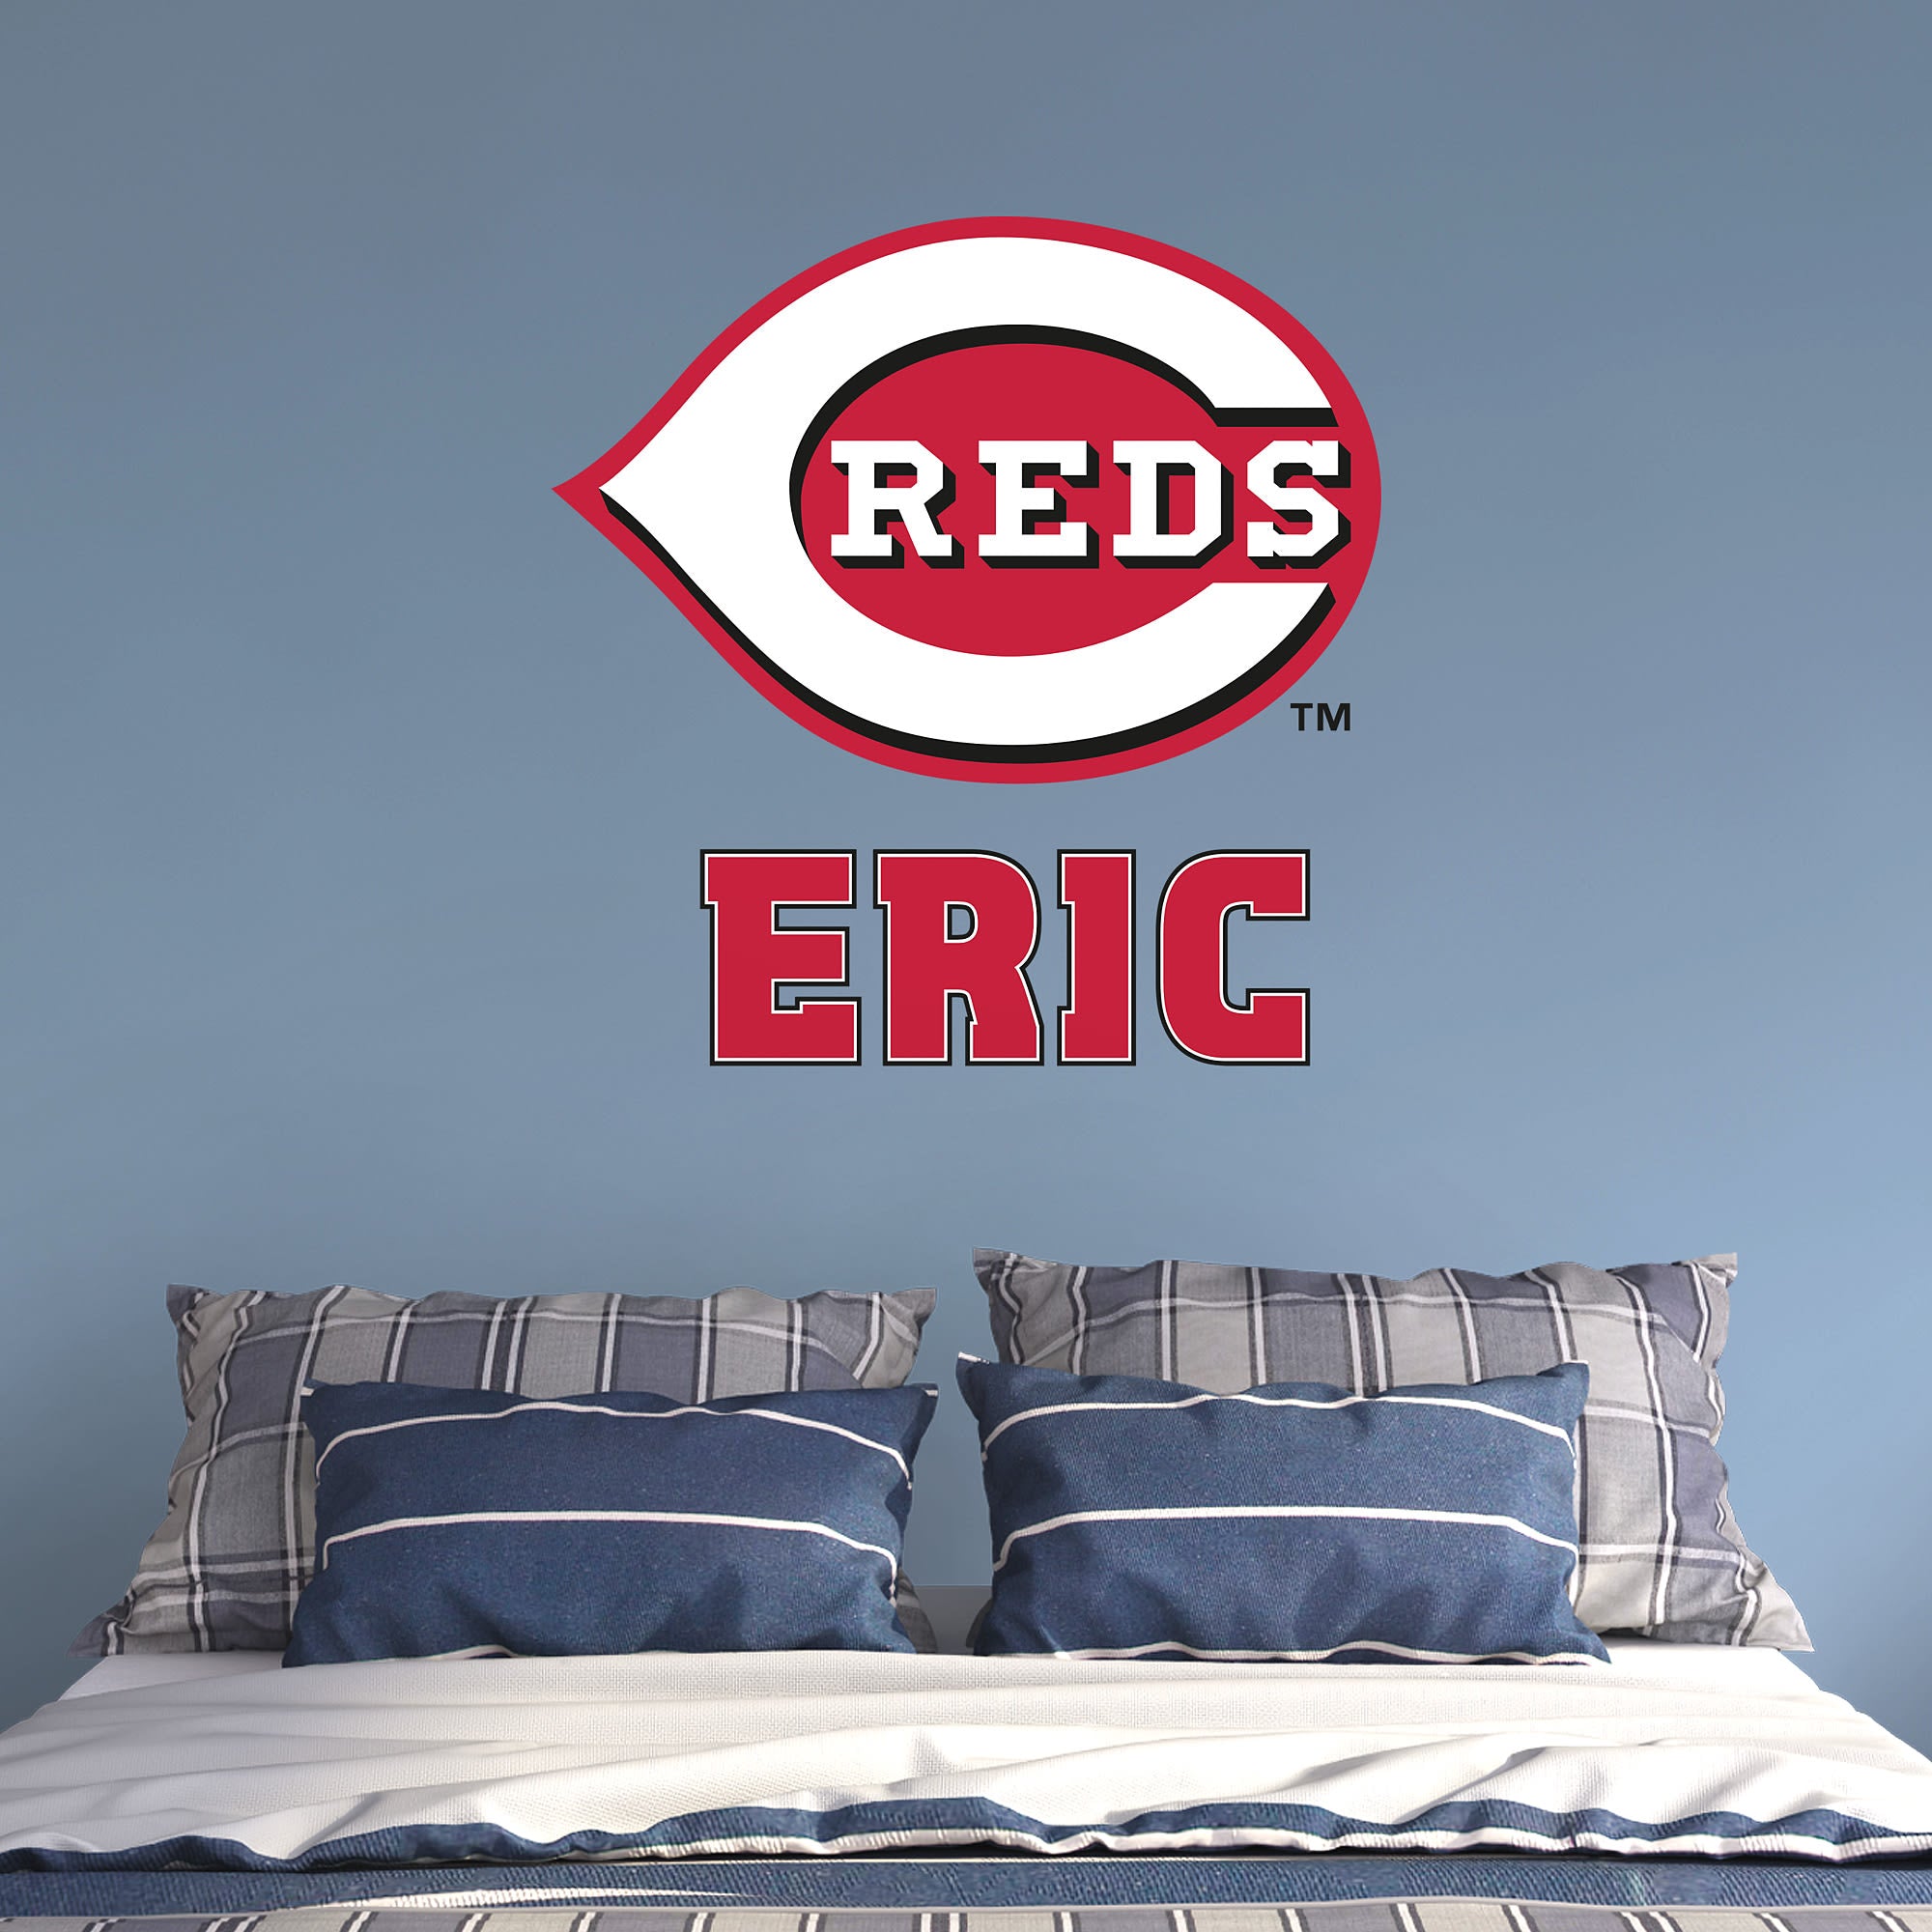 Cincinnati Reds: Stacked Personalized Name - Officially Licensed MLB Transfer Decal in Red (52"W x 39.5"H) by Fathead | Vinyl